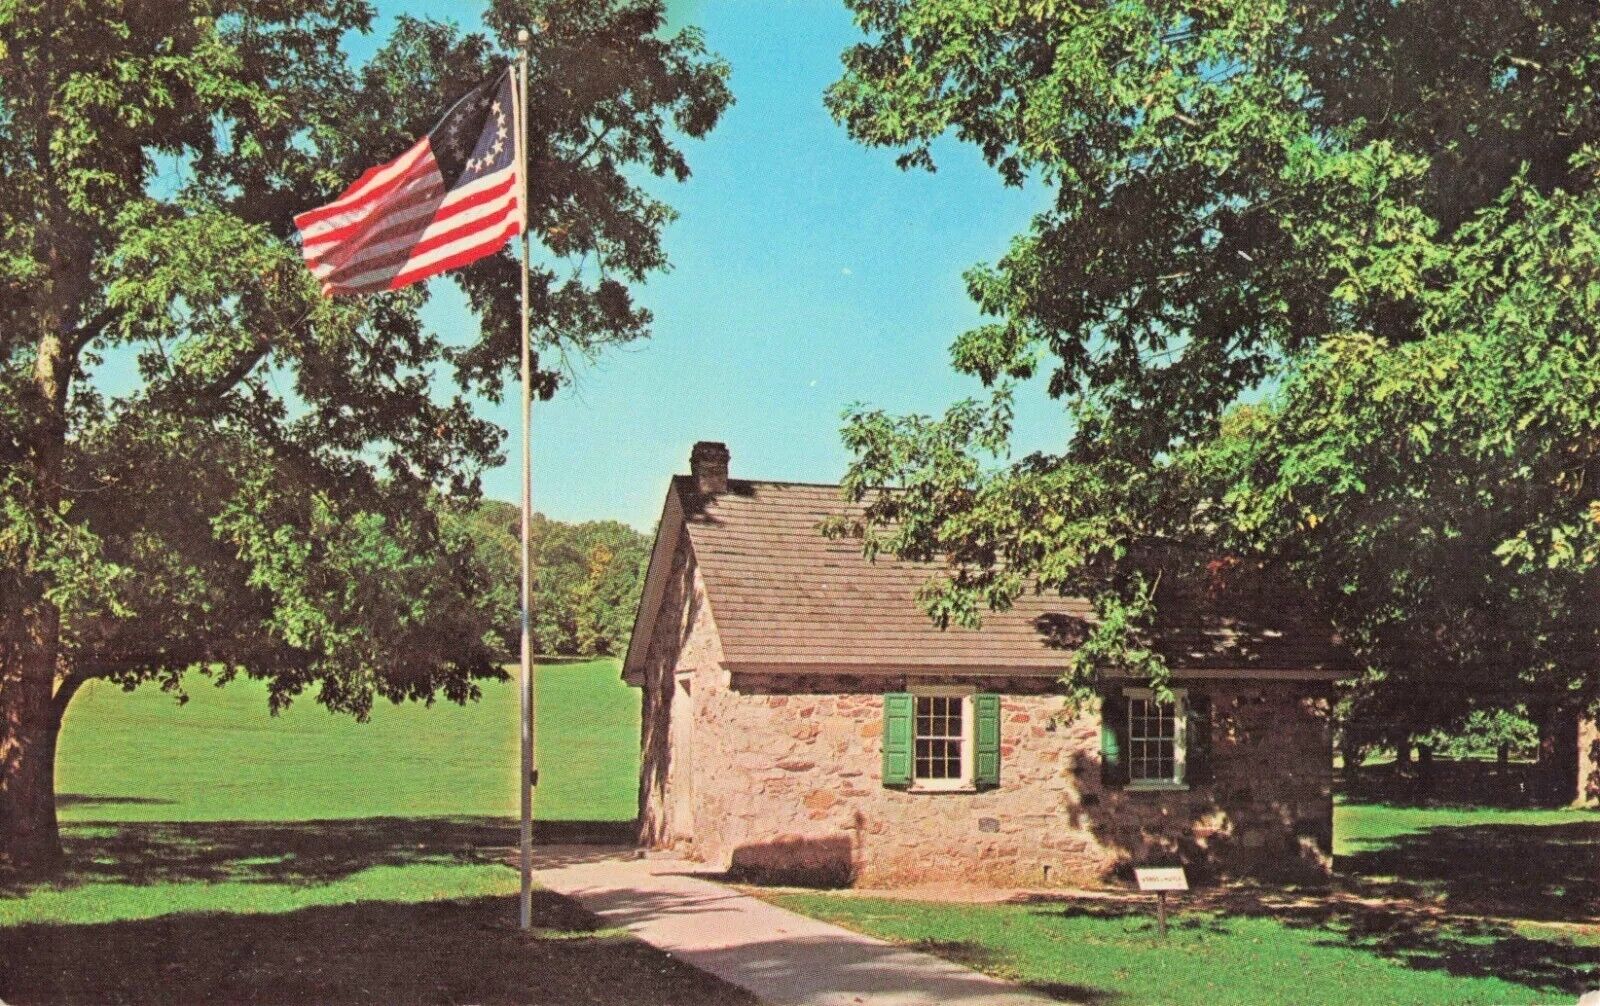 The Old Camp Schoolhouse - Valley Forge Pennsylvania PA - Postcard